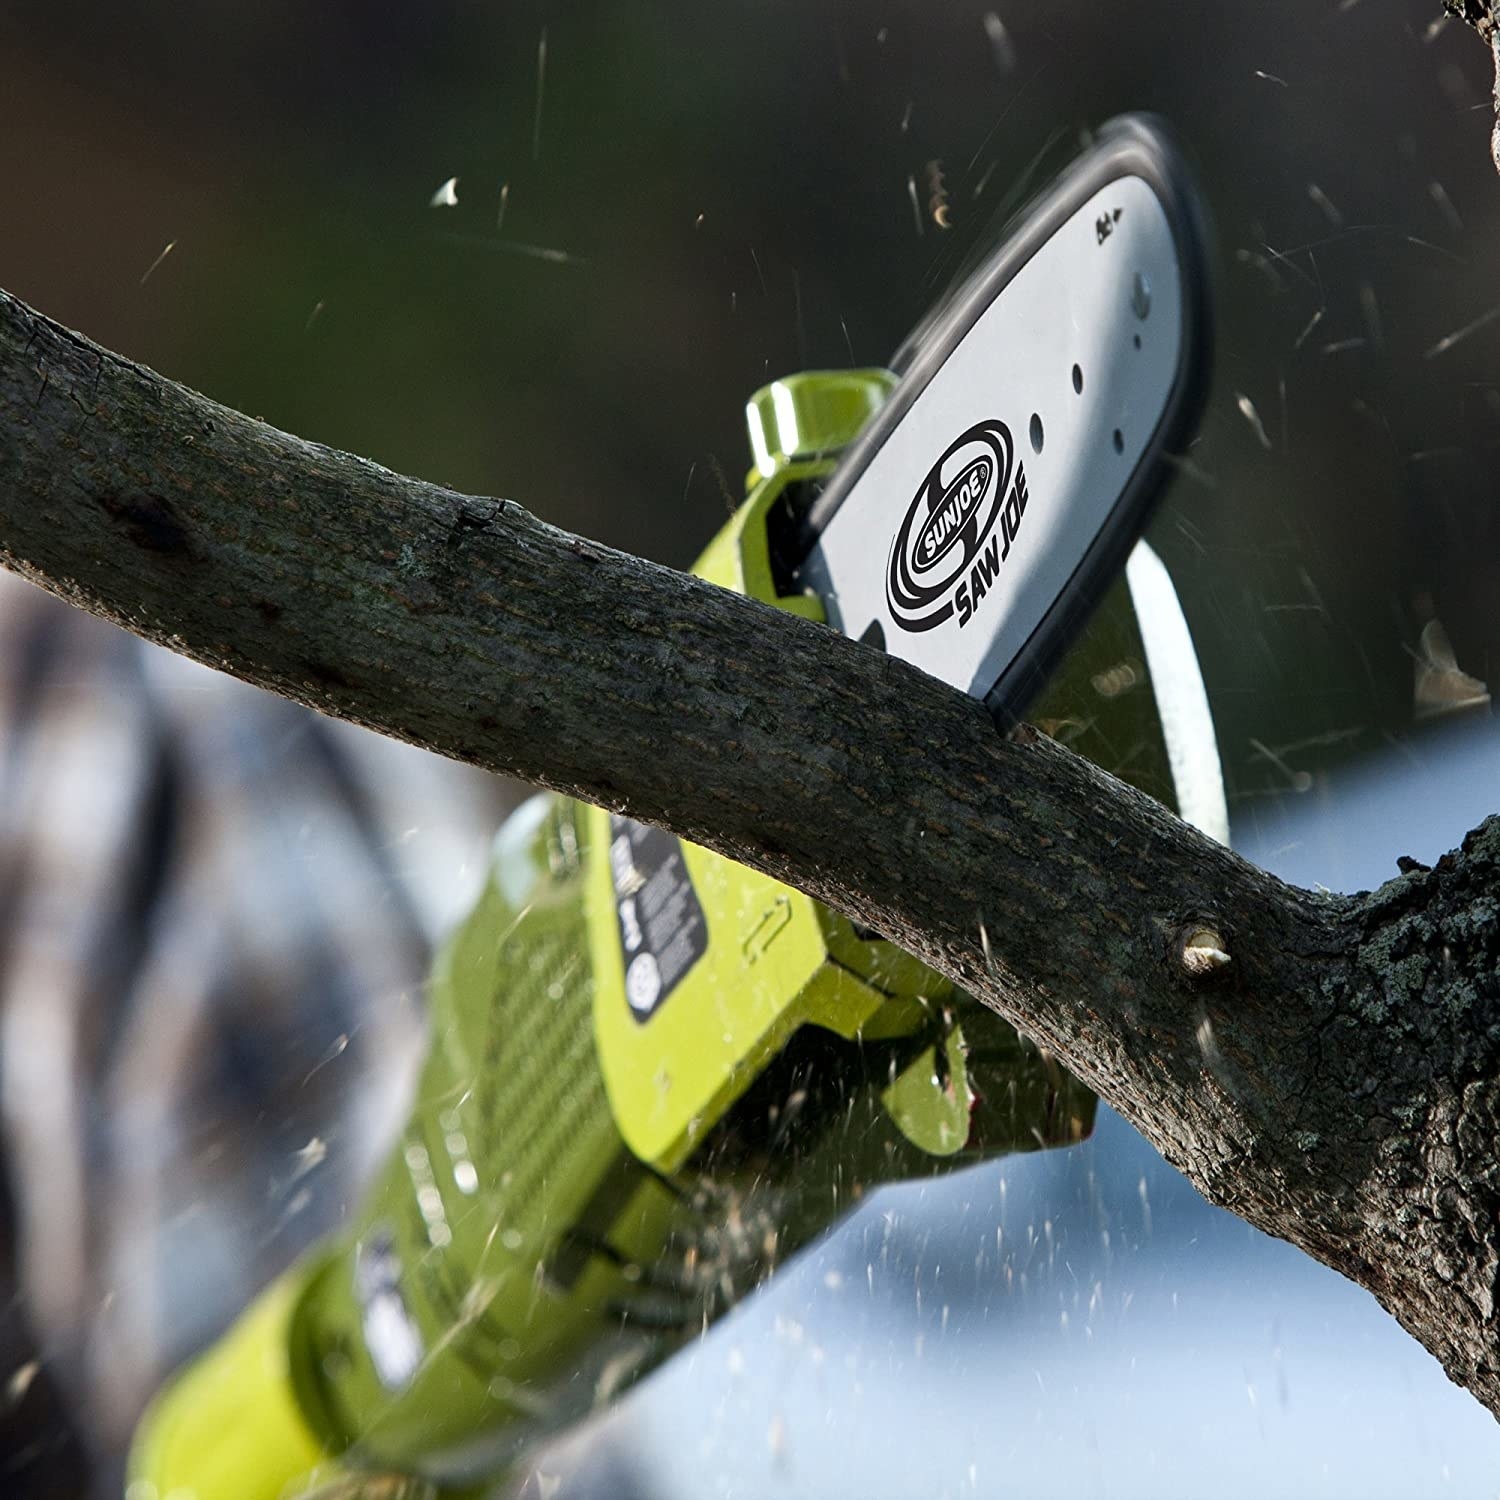 Close-up of of the saw cutting a tree branch